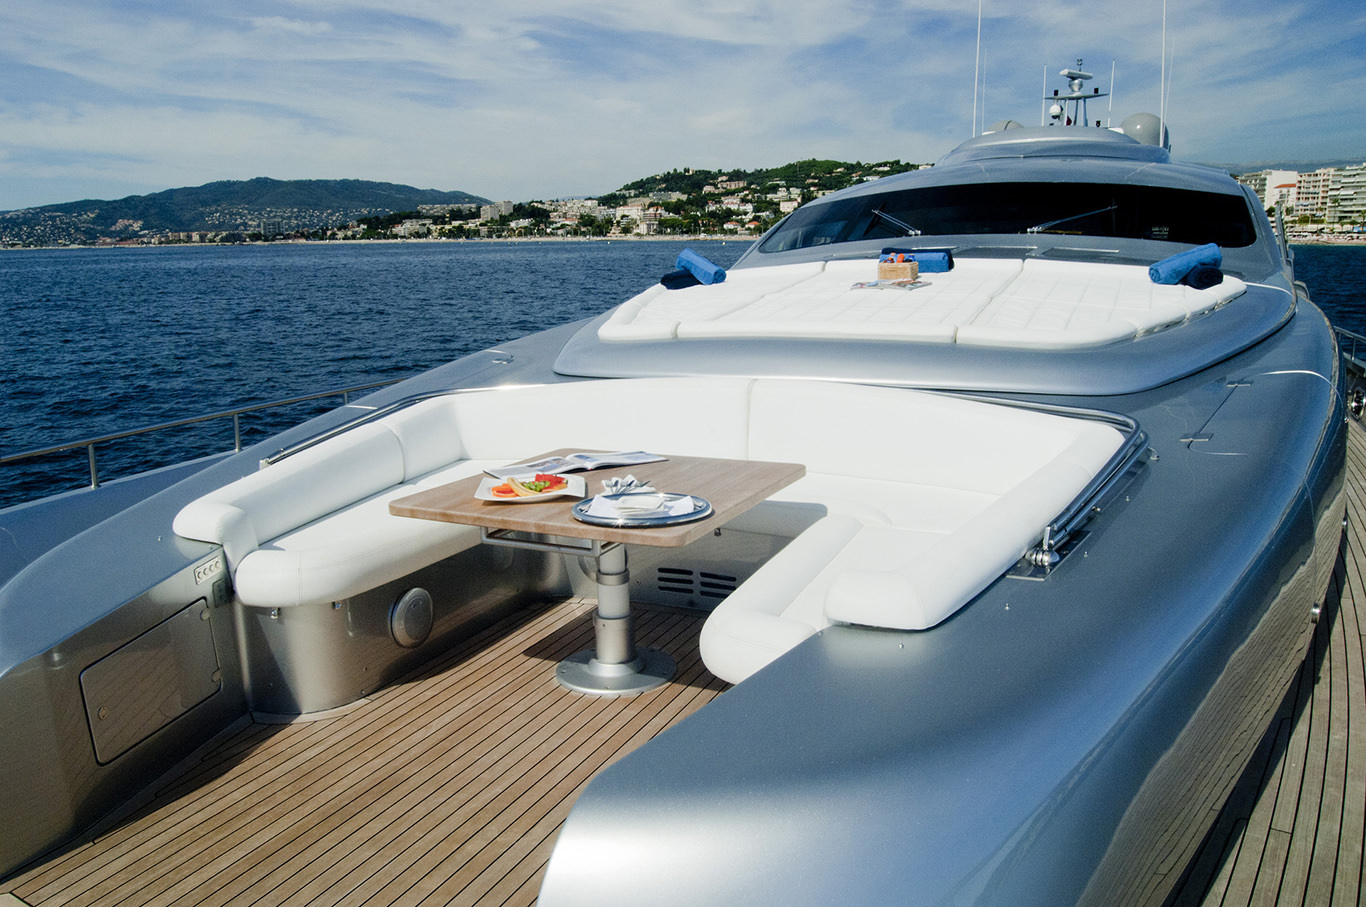 Mistral 55 - Exterior Living Spaces